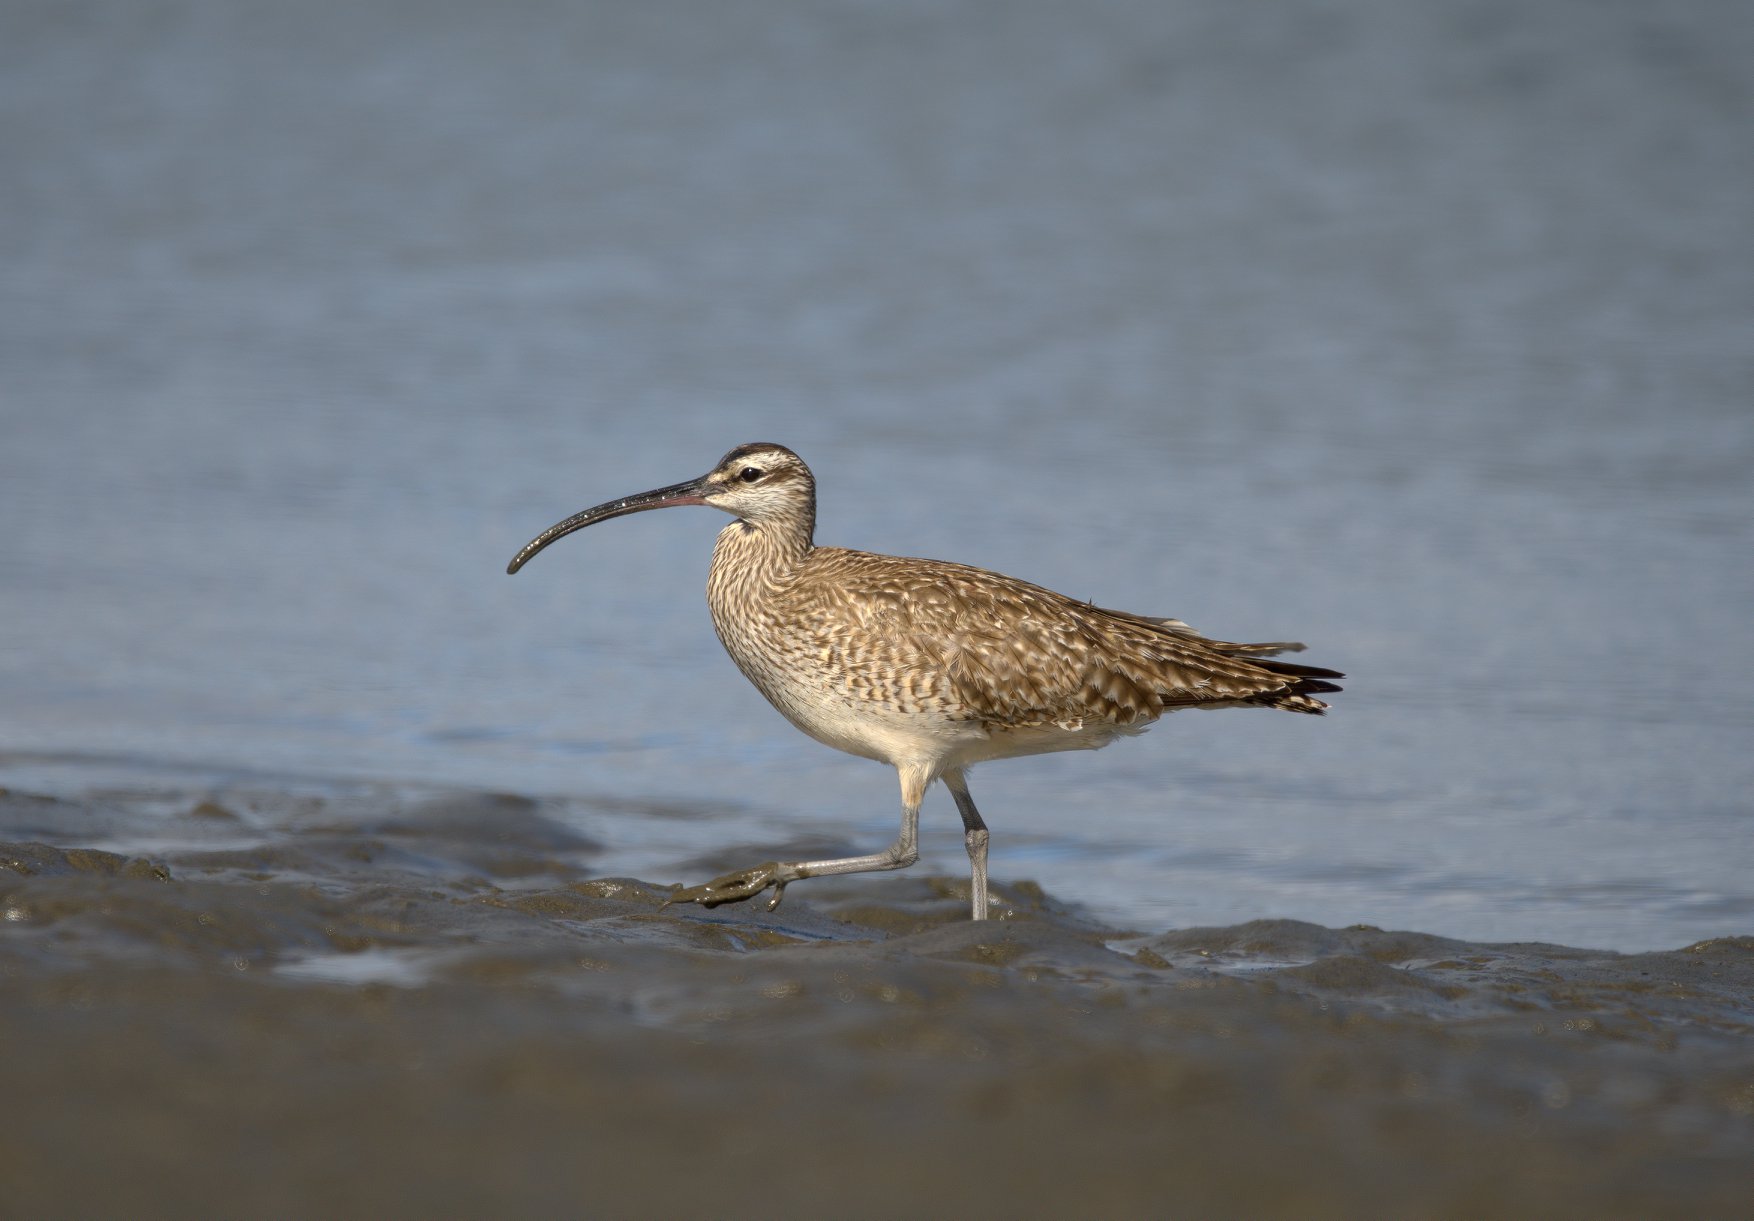 Long-billed Curlew, a large shorebird species, walks along the mudflats.